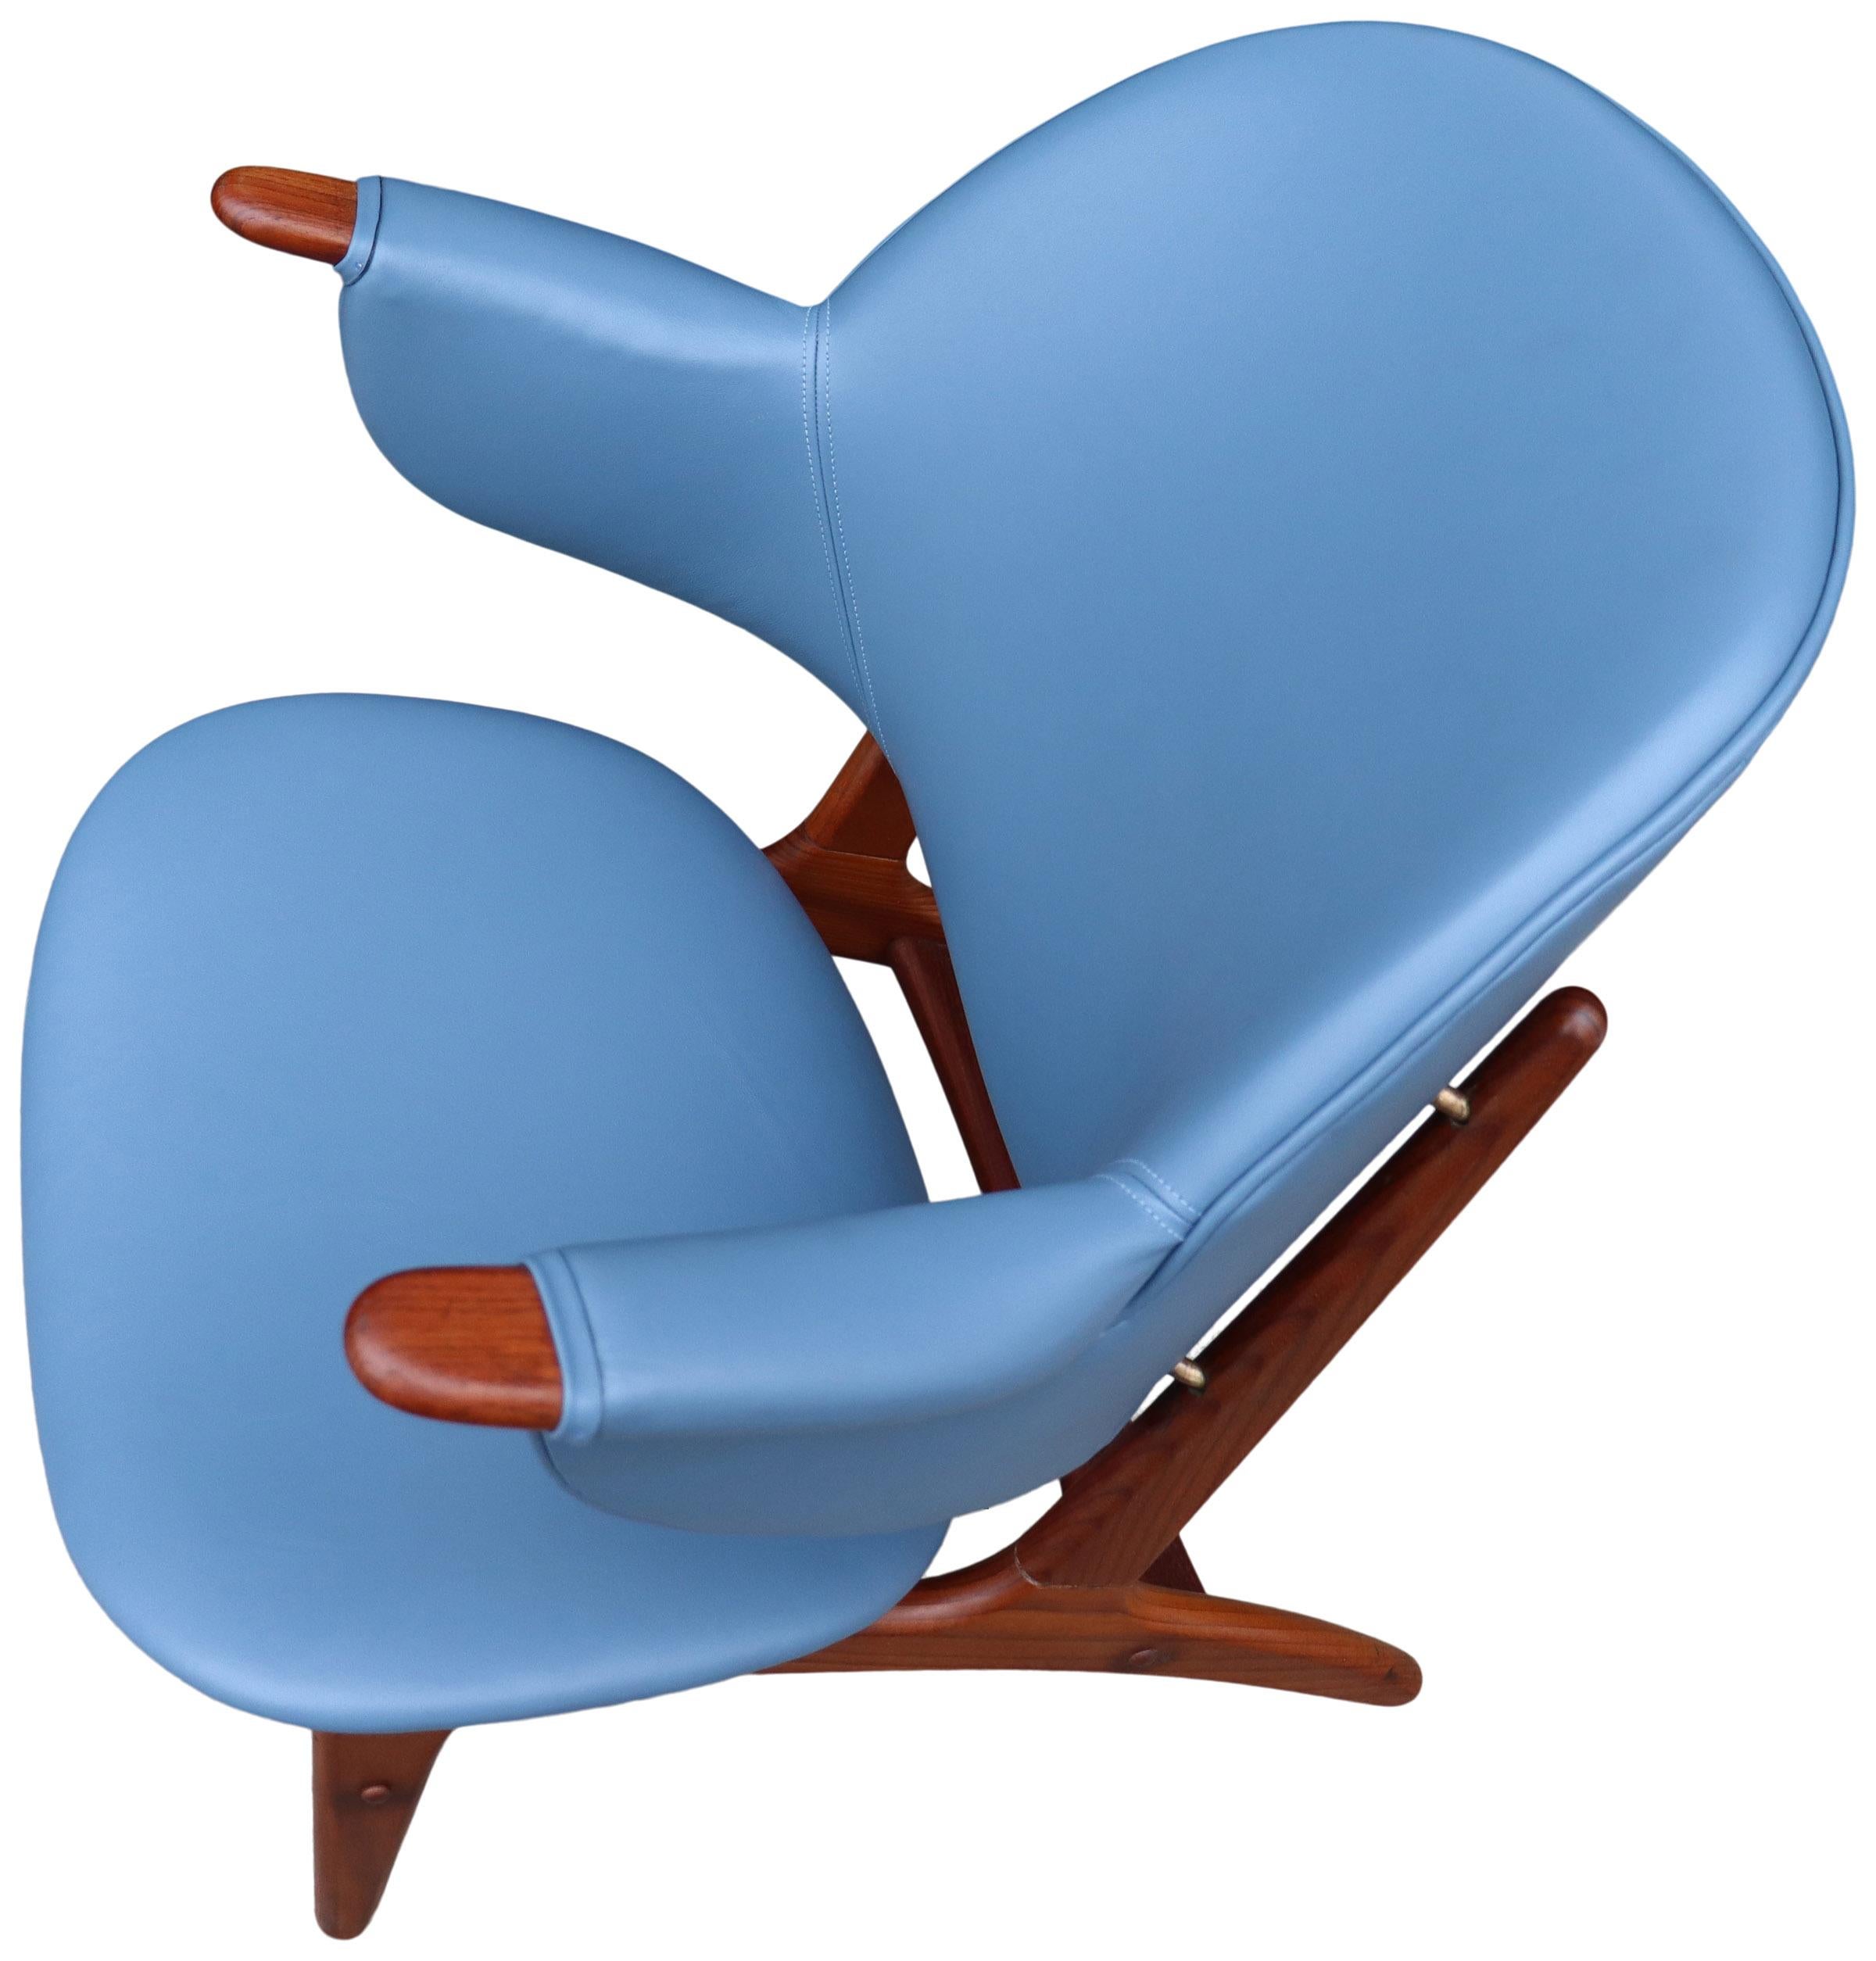 20th Century Arne Hovmand-Olsen Lounge Chair in Blue Leather For Sale